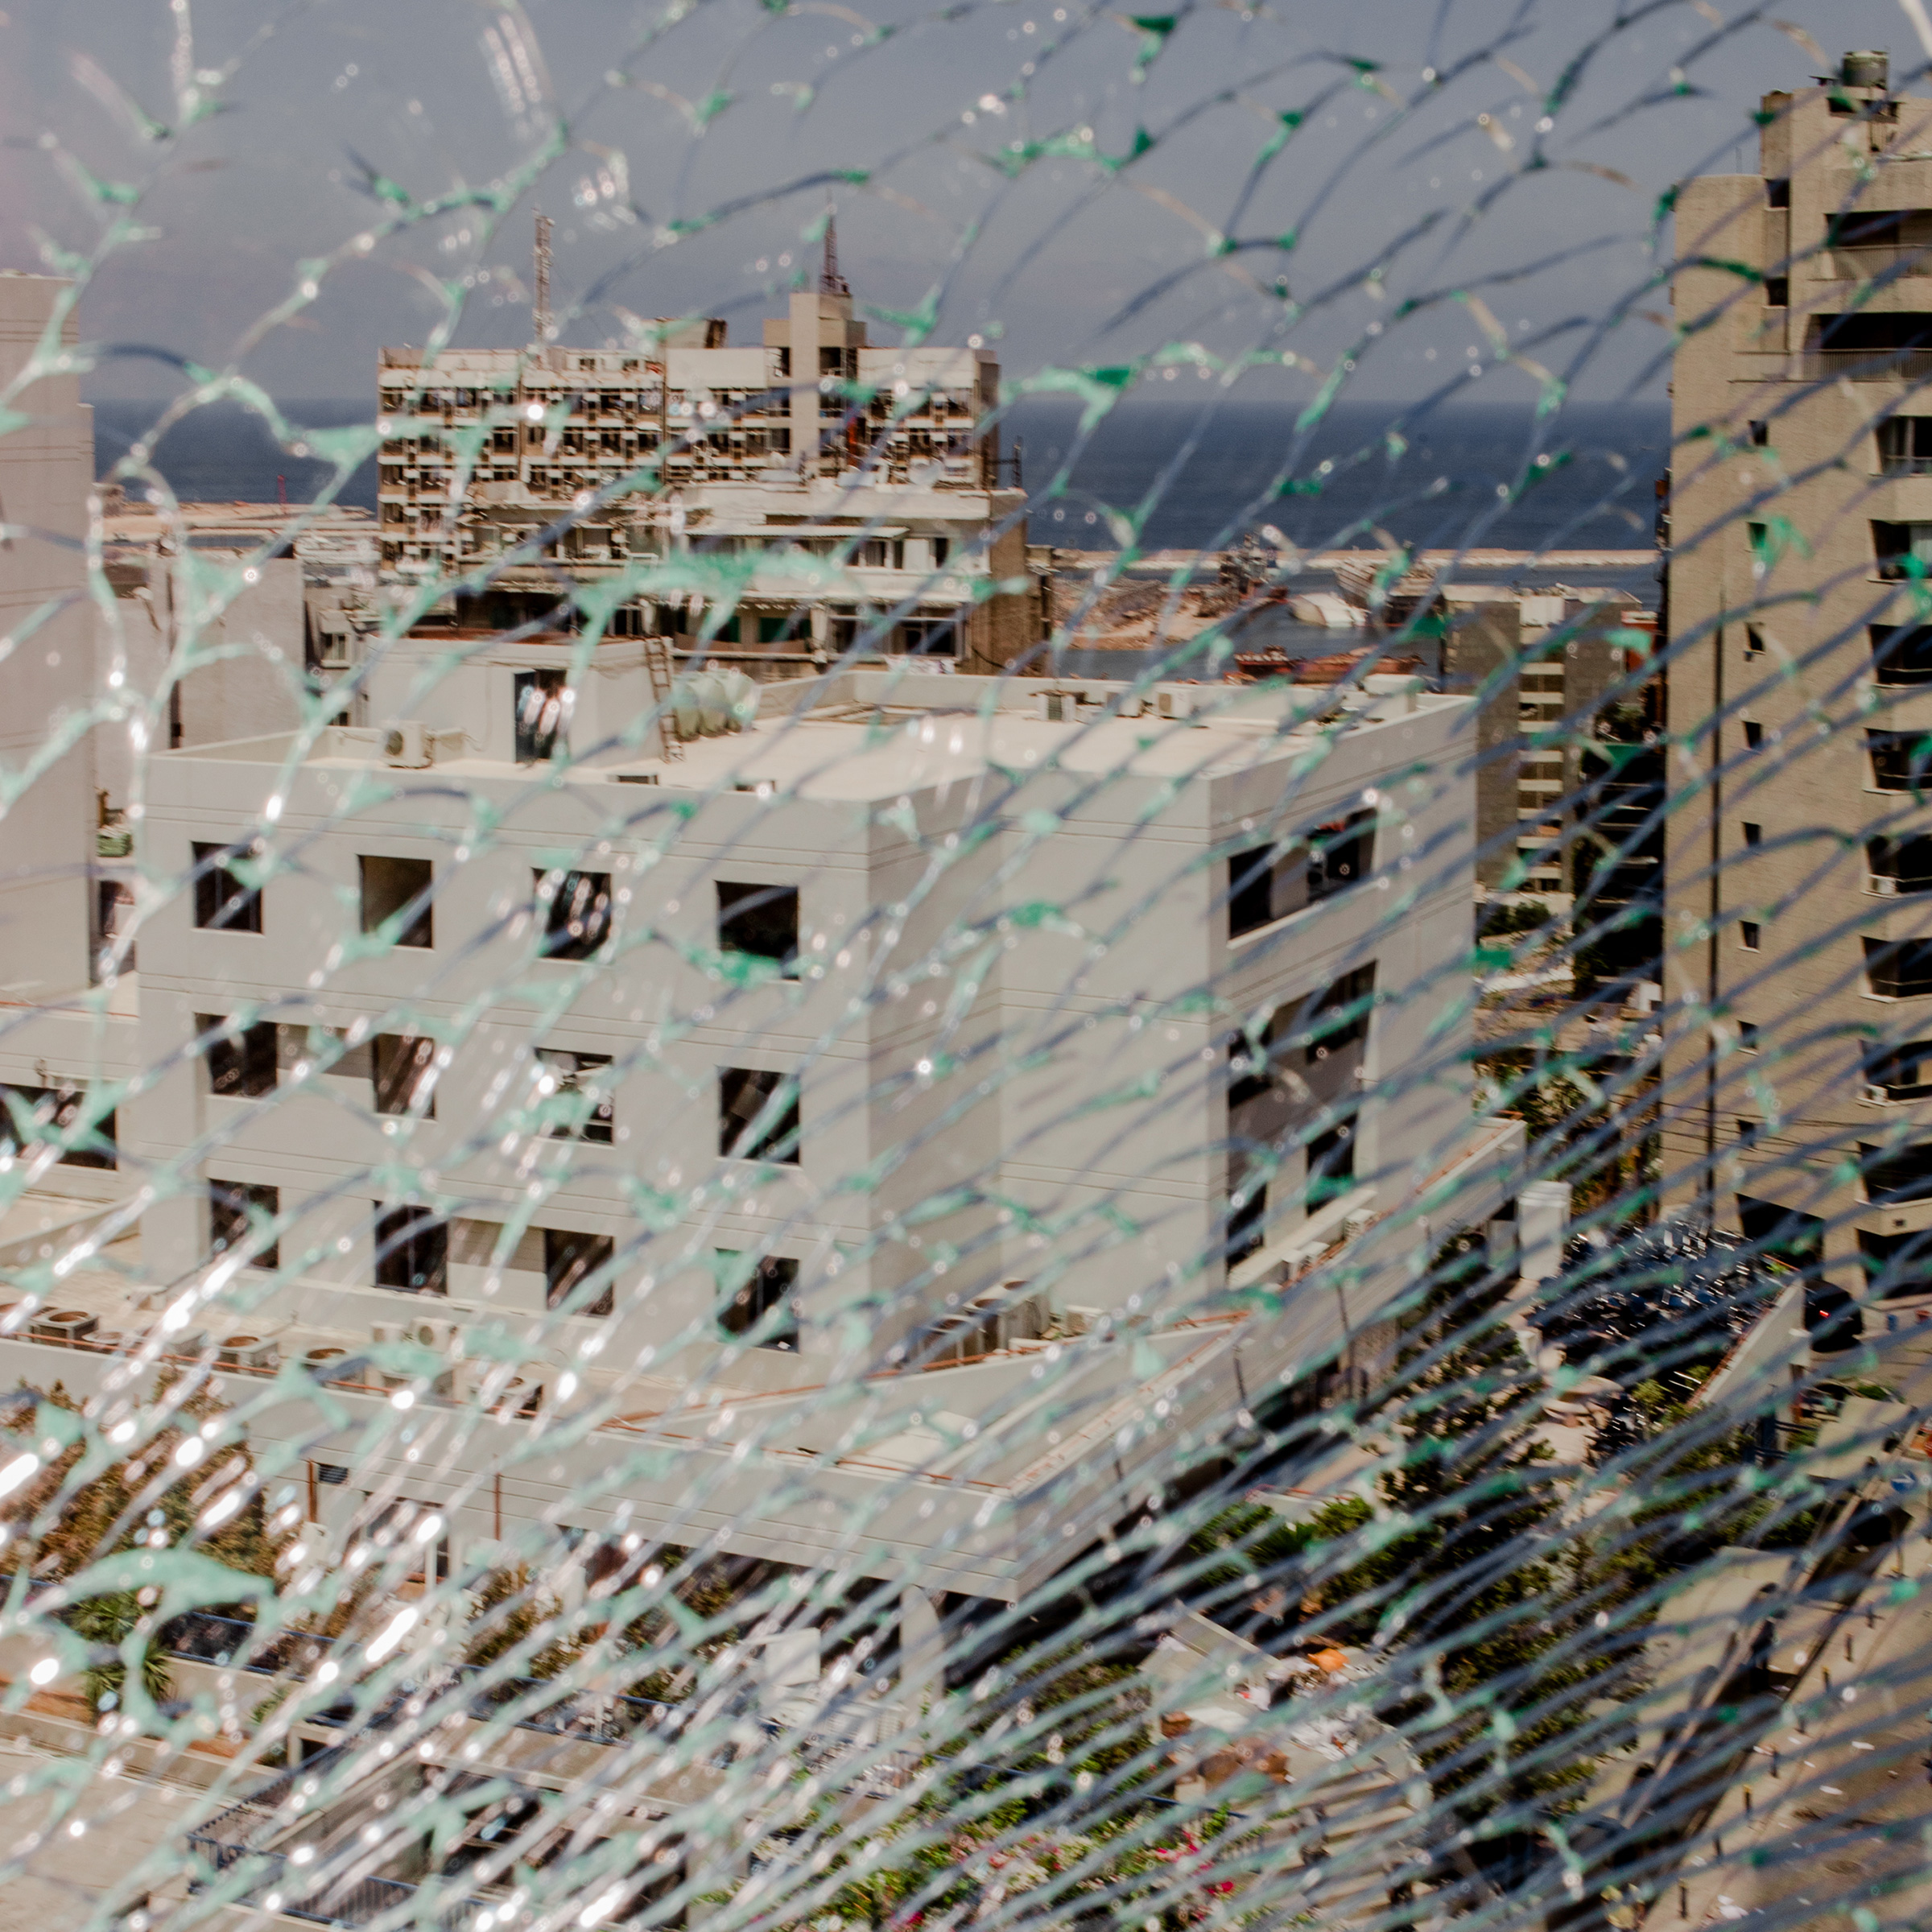 A view of Beirut's port from inside the damaged St. George Hospital. "None of us were prepared for an event of this cataclysmic magnitude, nor should we have been," says Ghantous, the medical student. "And while we’ve all been affected differently, we’re all bound by the criminal malfeasance of those elected to serve us. As we try to rebuild what they broke, the pain will subside, but the memory will not."